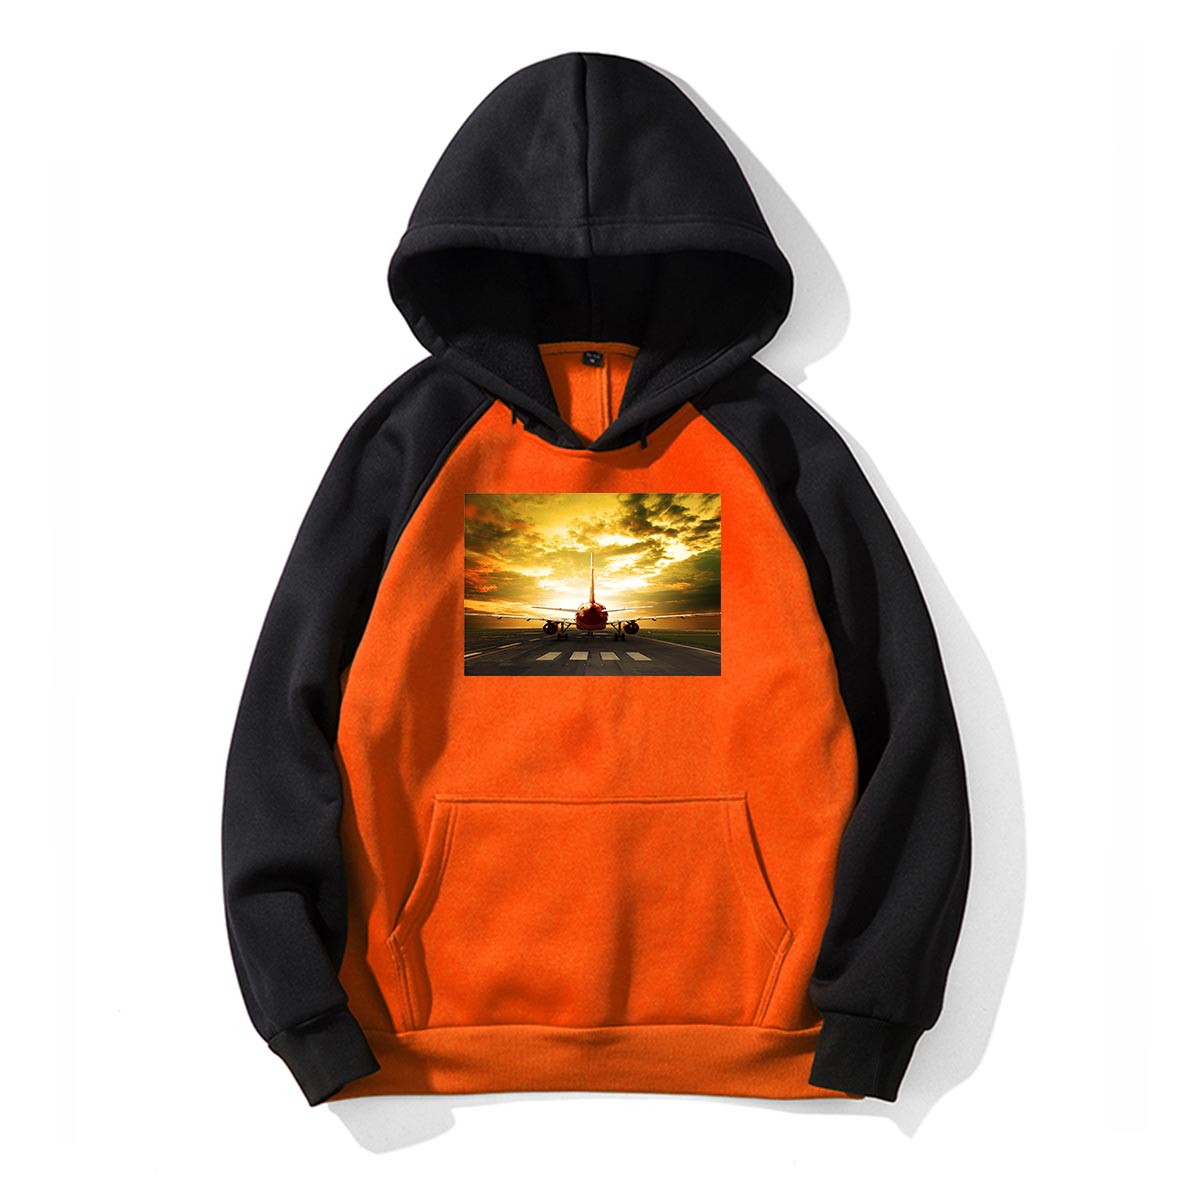 Ready for Departure Passanger Jet Designed Colourful Hoodies